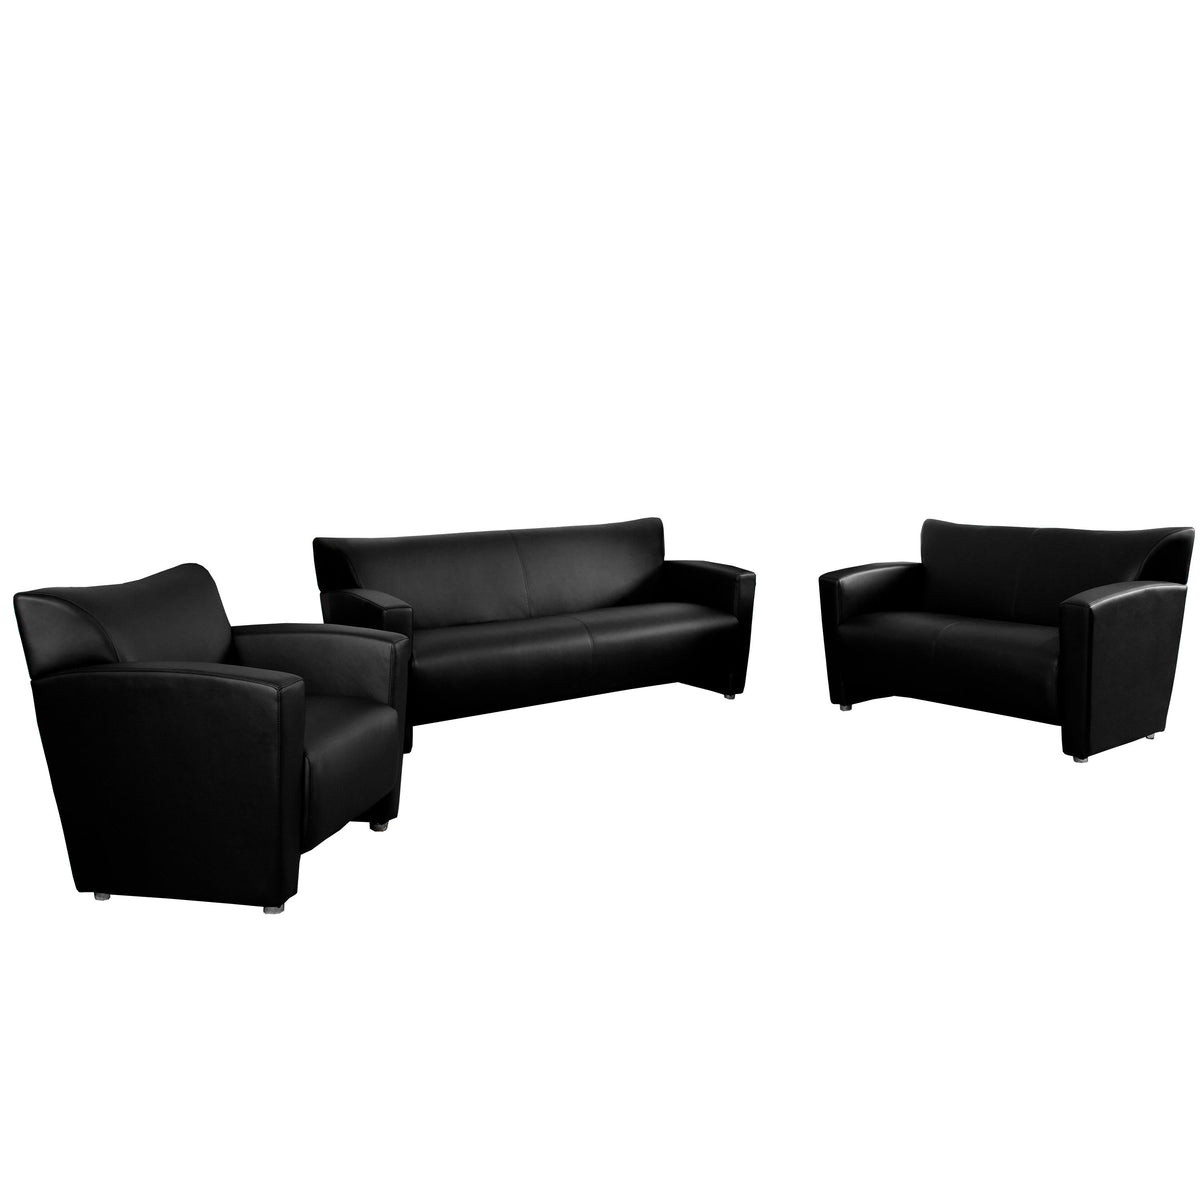 Black |#| Reception Set with Extended Panel Arms - Hospitality or Lounge Seating